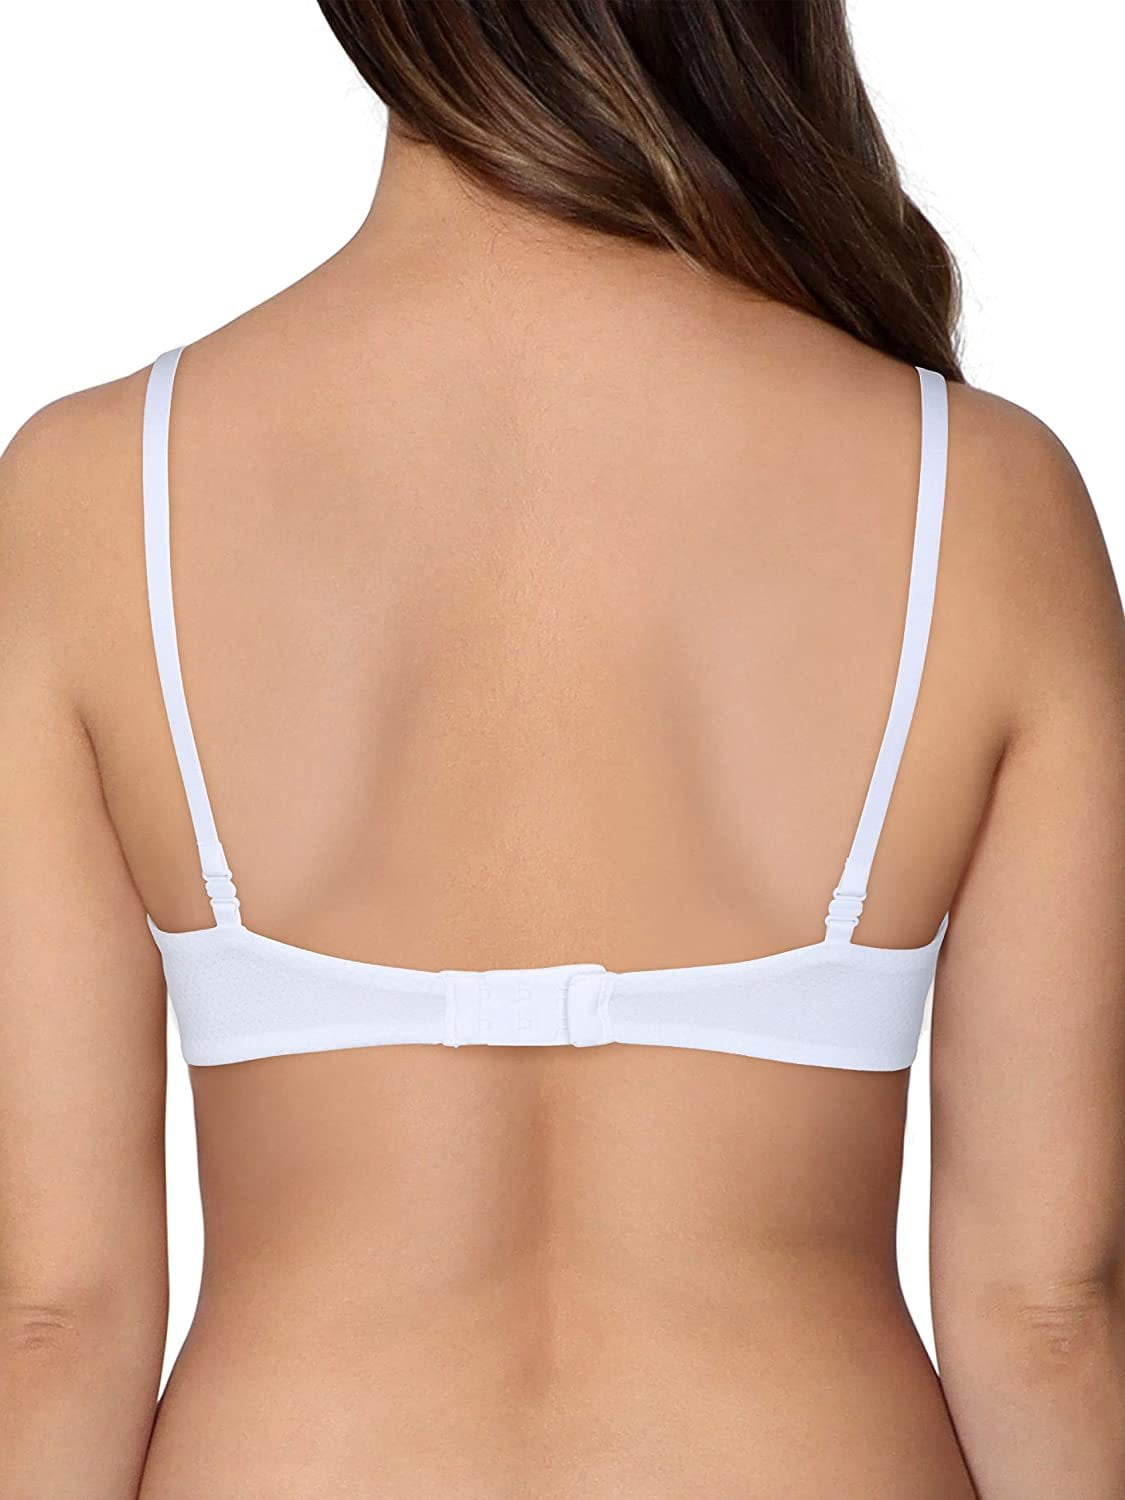 Women's Fruit of the Loom® Breathable Underwire Cami Bra 1DKBSCA